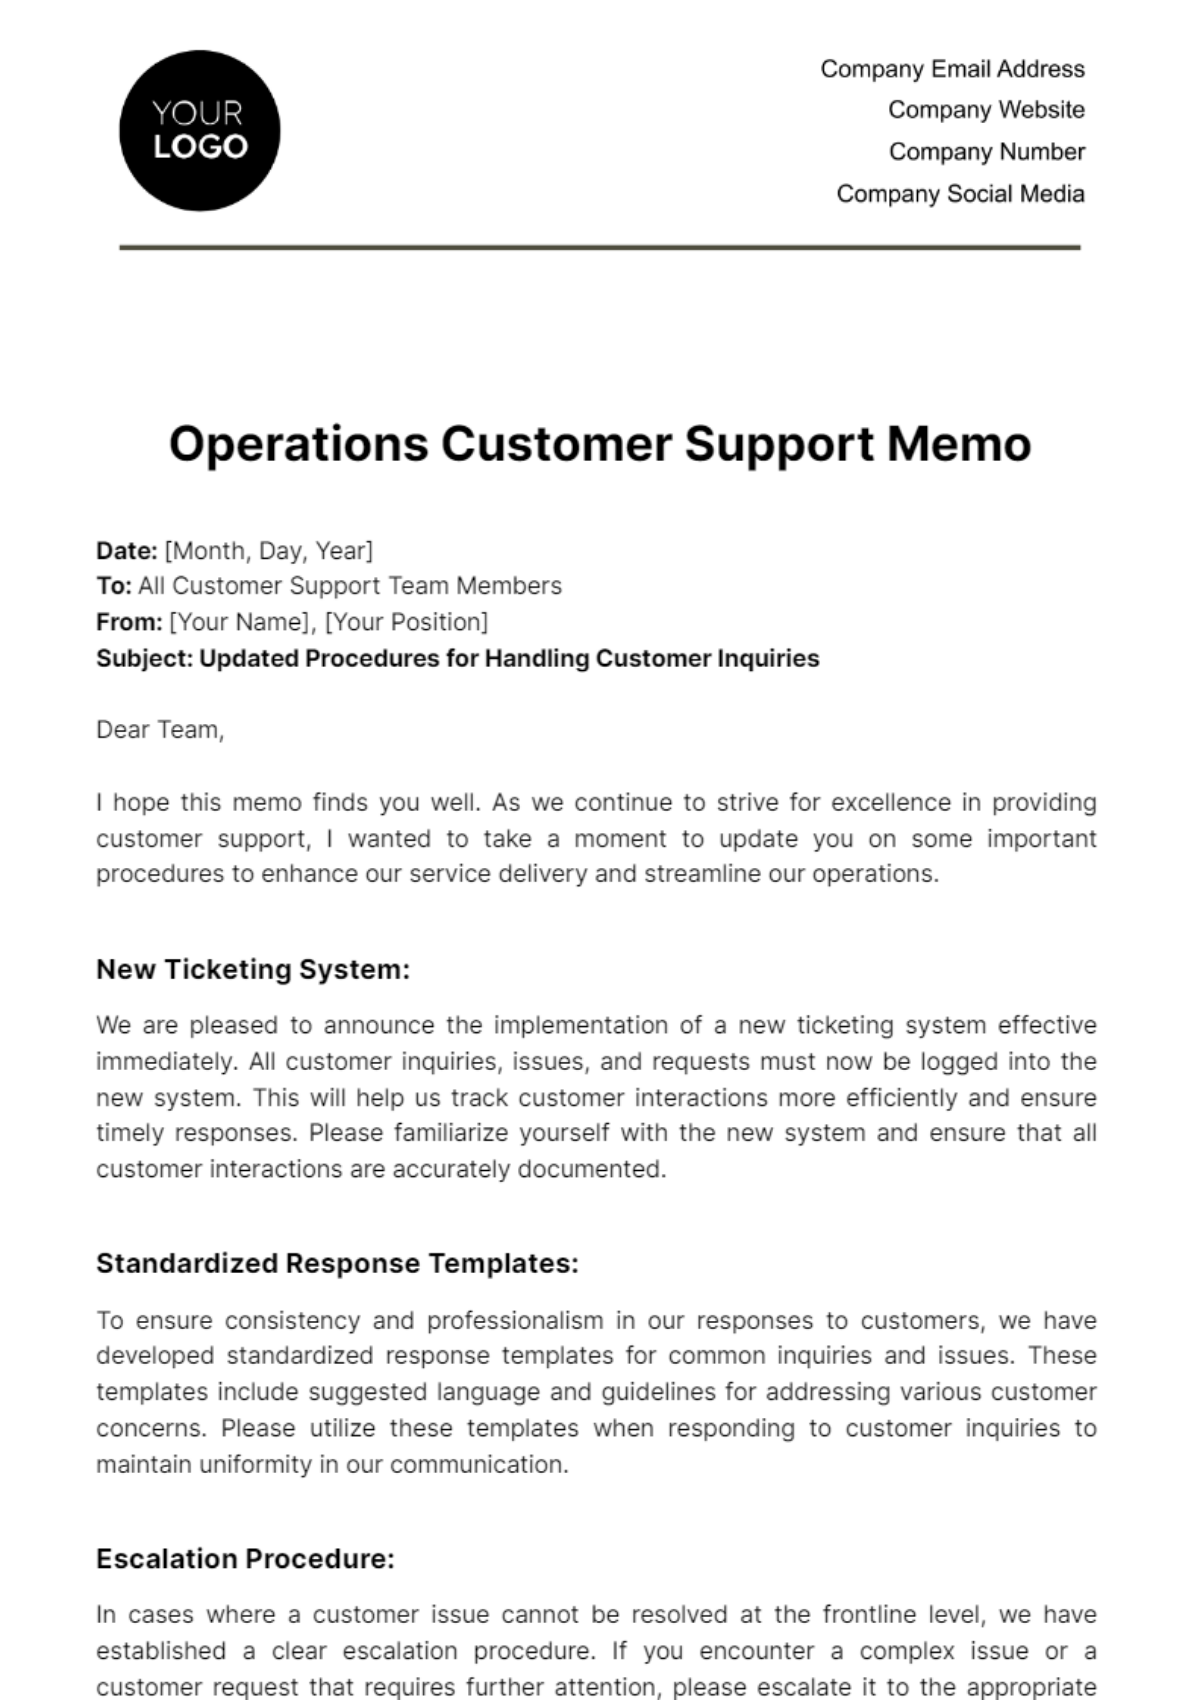 Operations Customer Support Memo Template